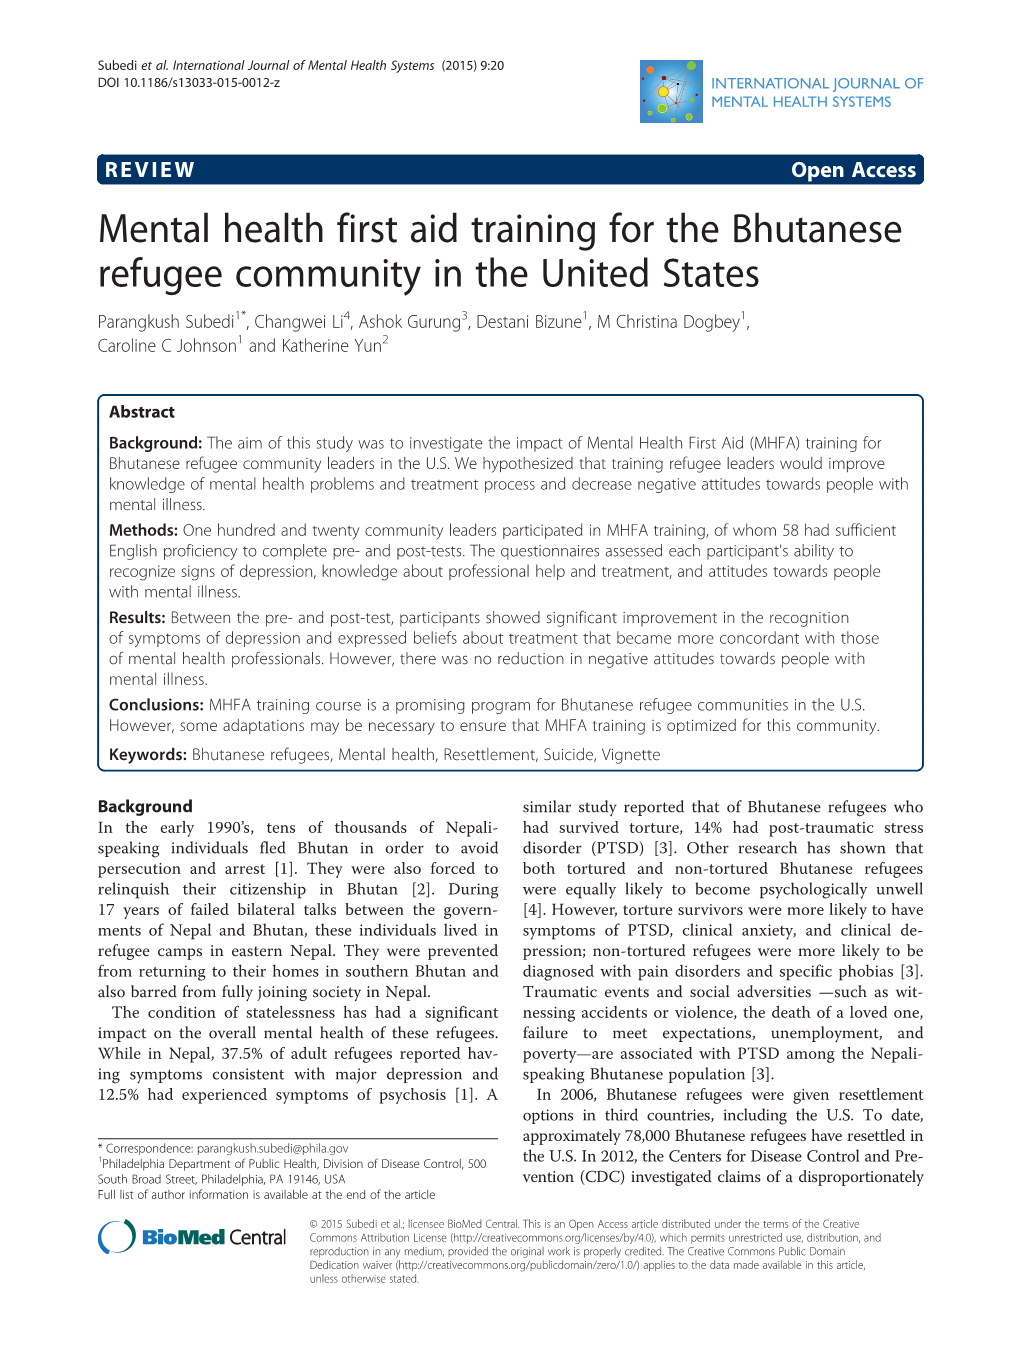 Mental Health First Aid Training for the Bhutanese Refugee Community In